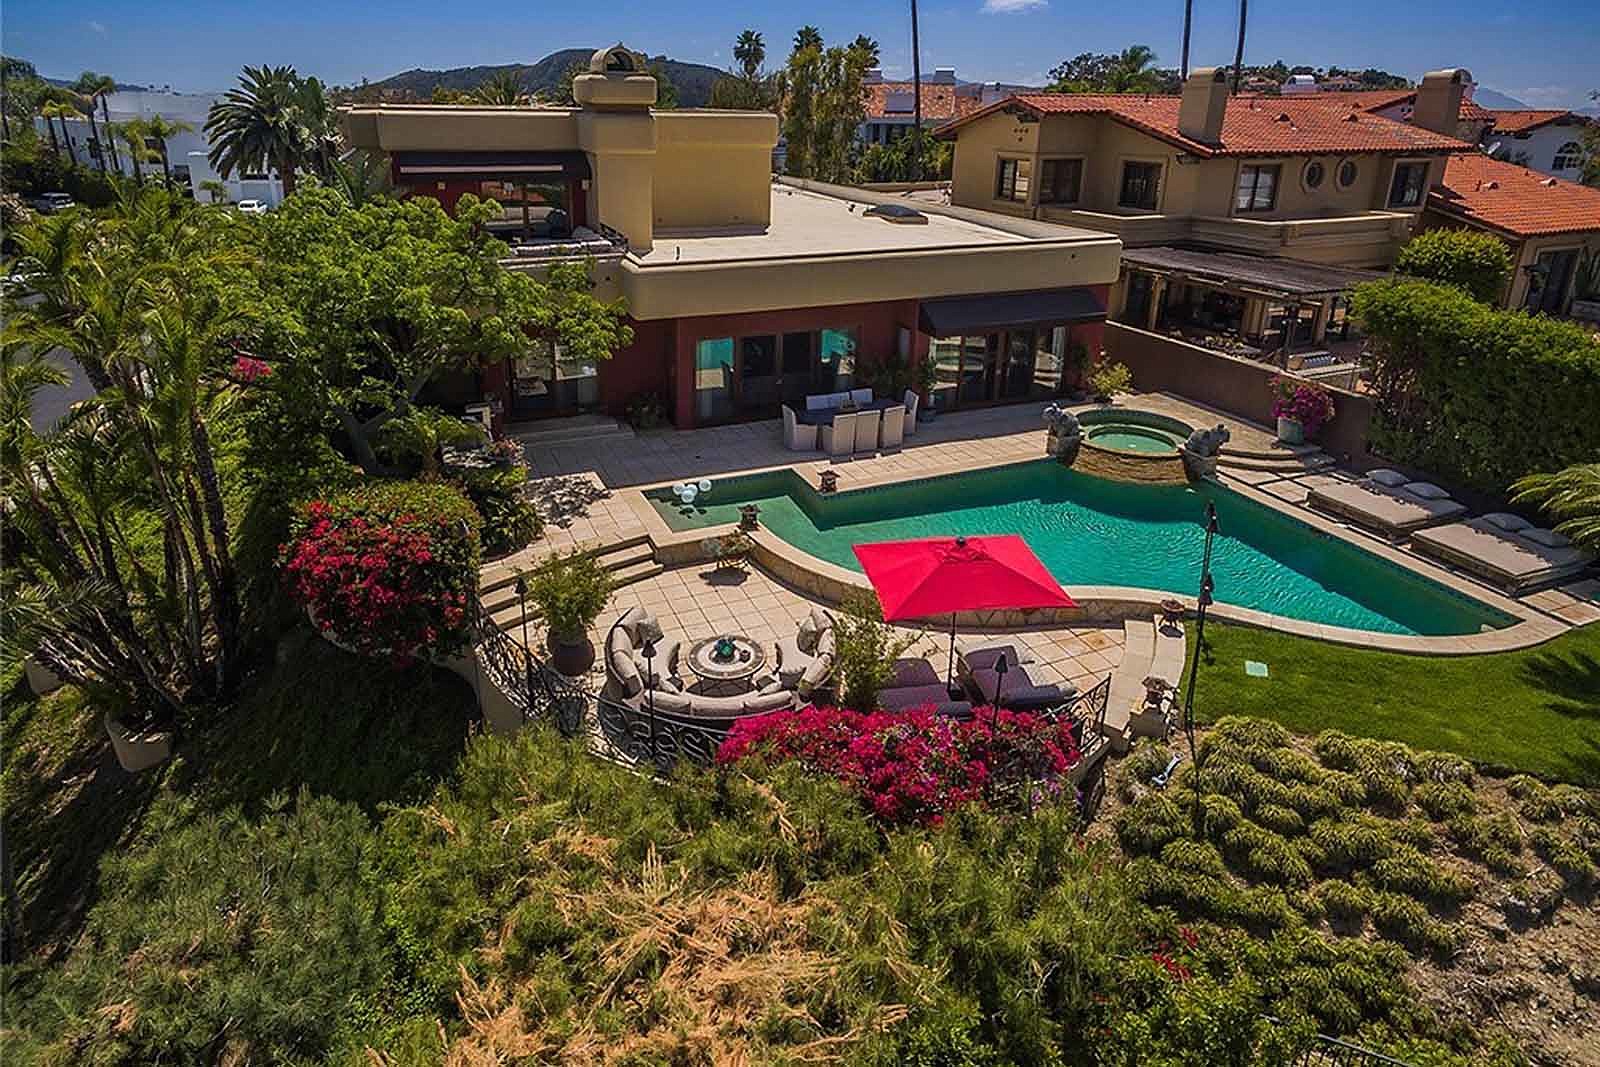 Tommy Lee's Home Sweet Home Can Be Yours for $4.65 Million